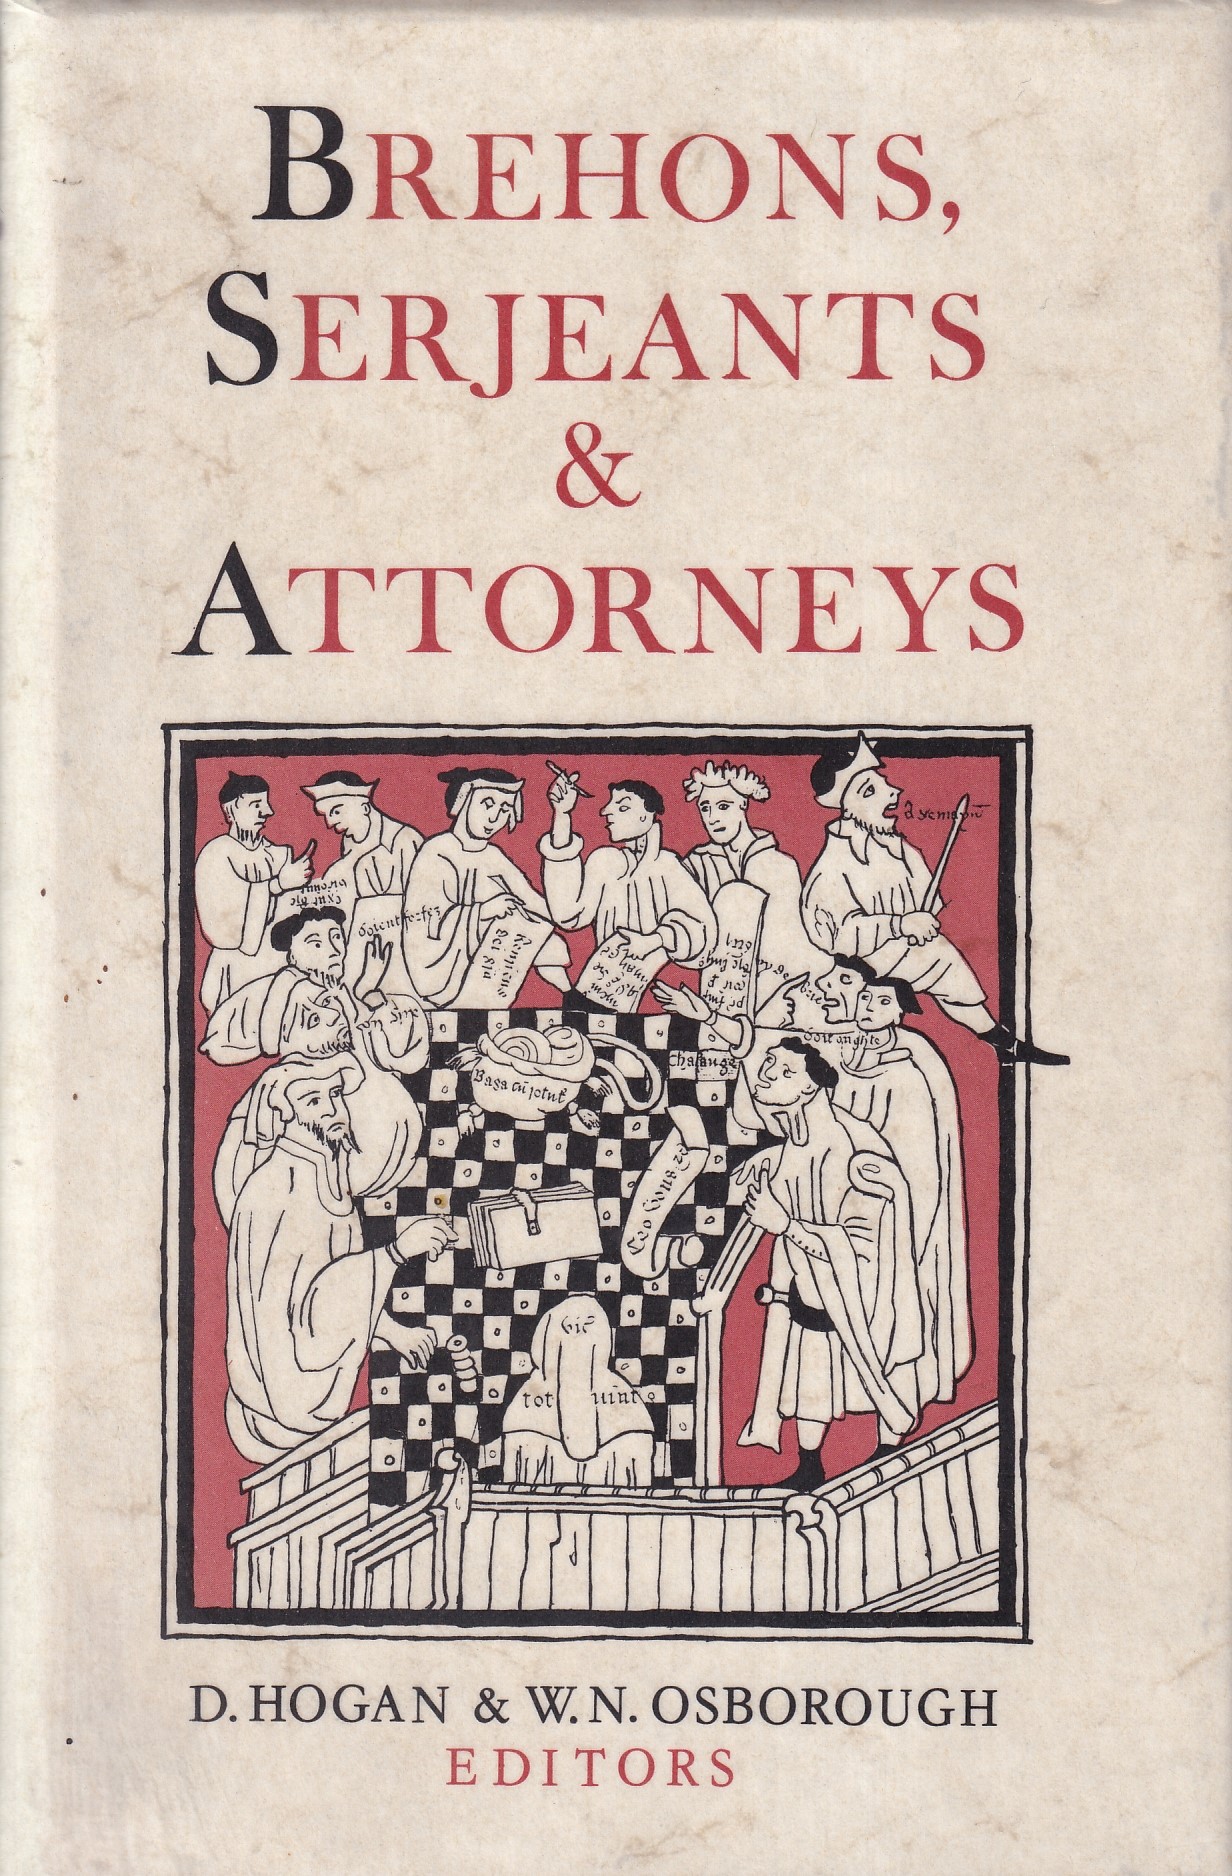 Brehons, Serjeants and Attorneys: Studies in the History of the Irish Legal Profession | D. Hogan & W. N. Osborough (eds.) | Charlie Byrne's